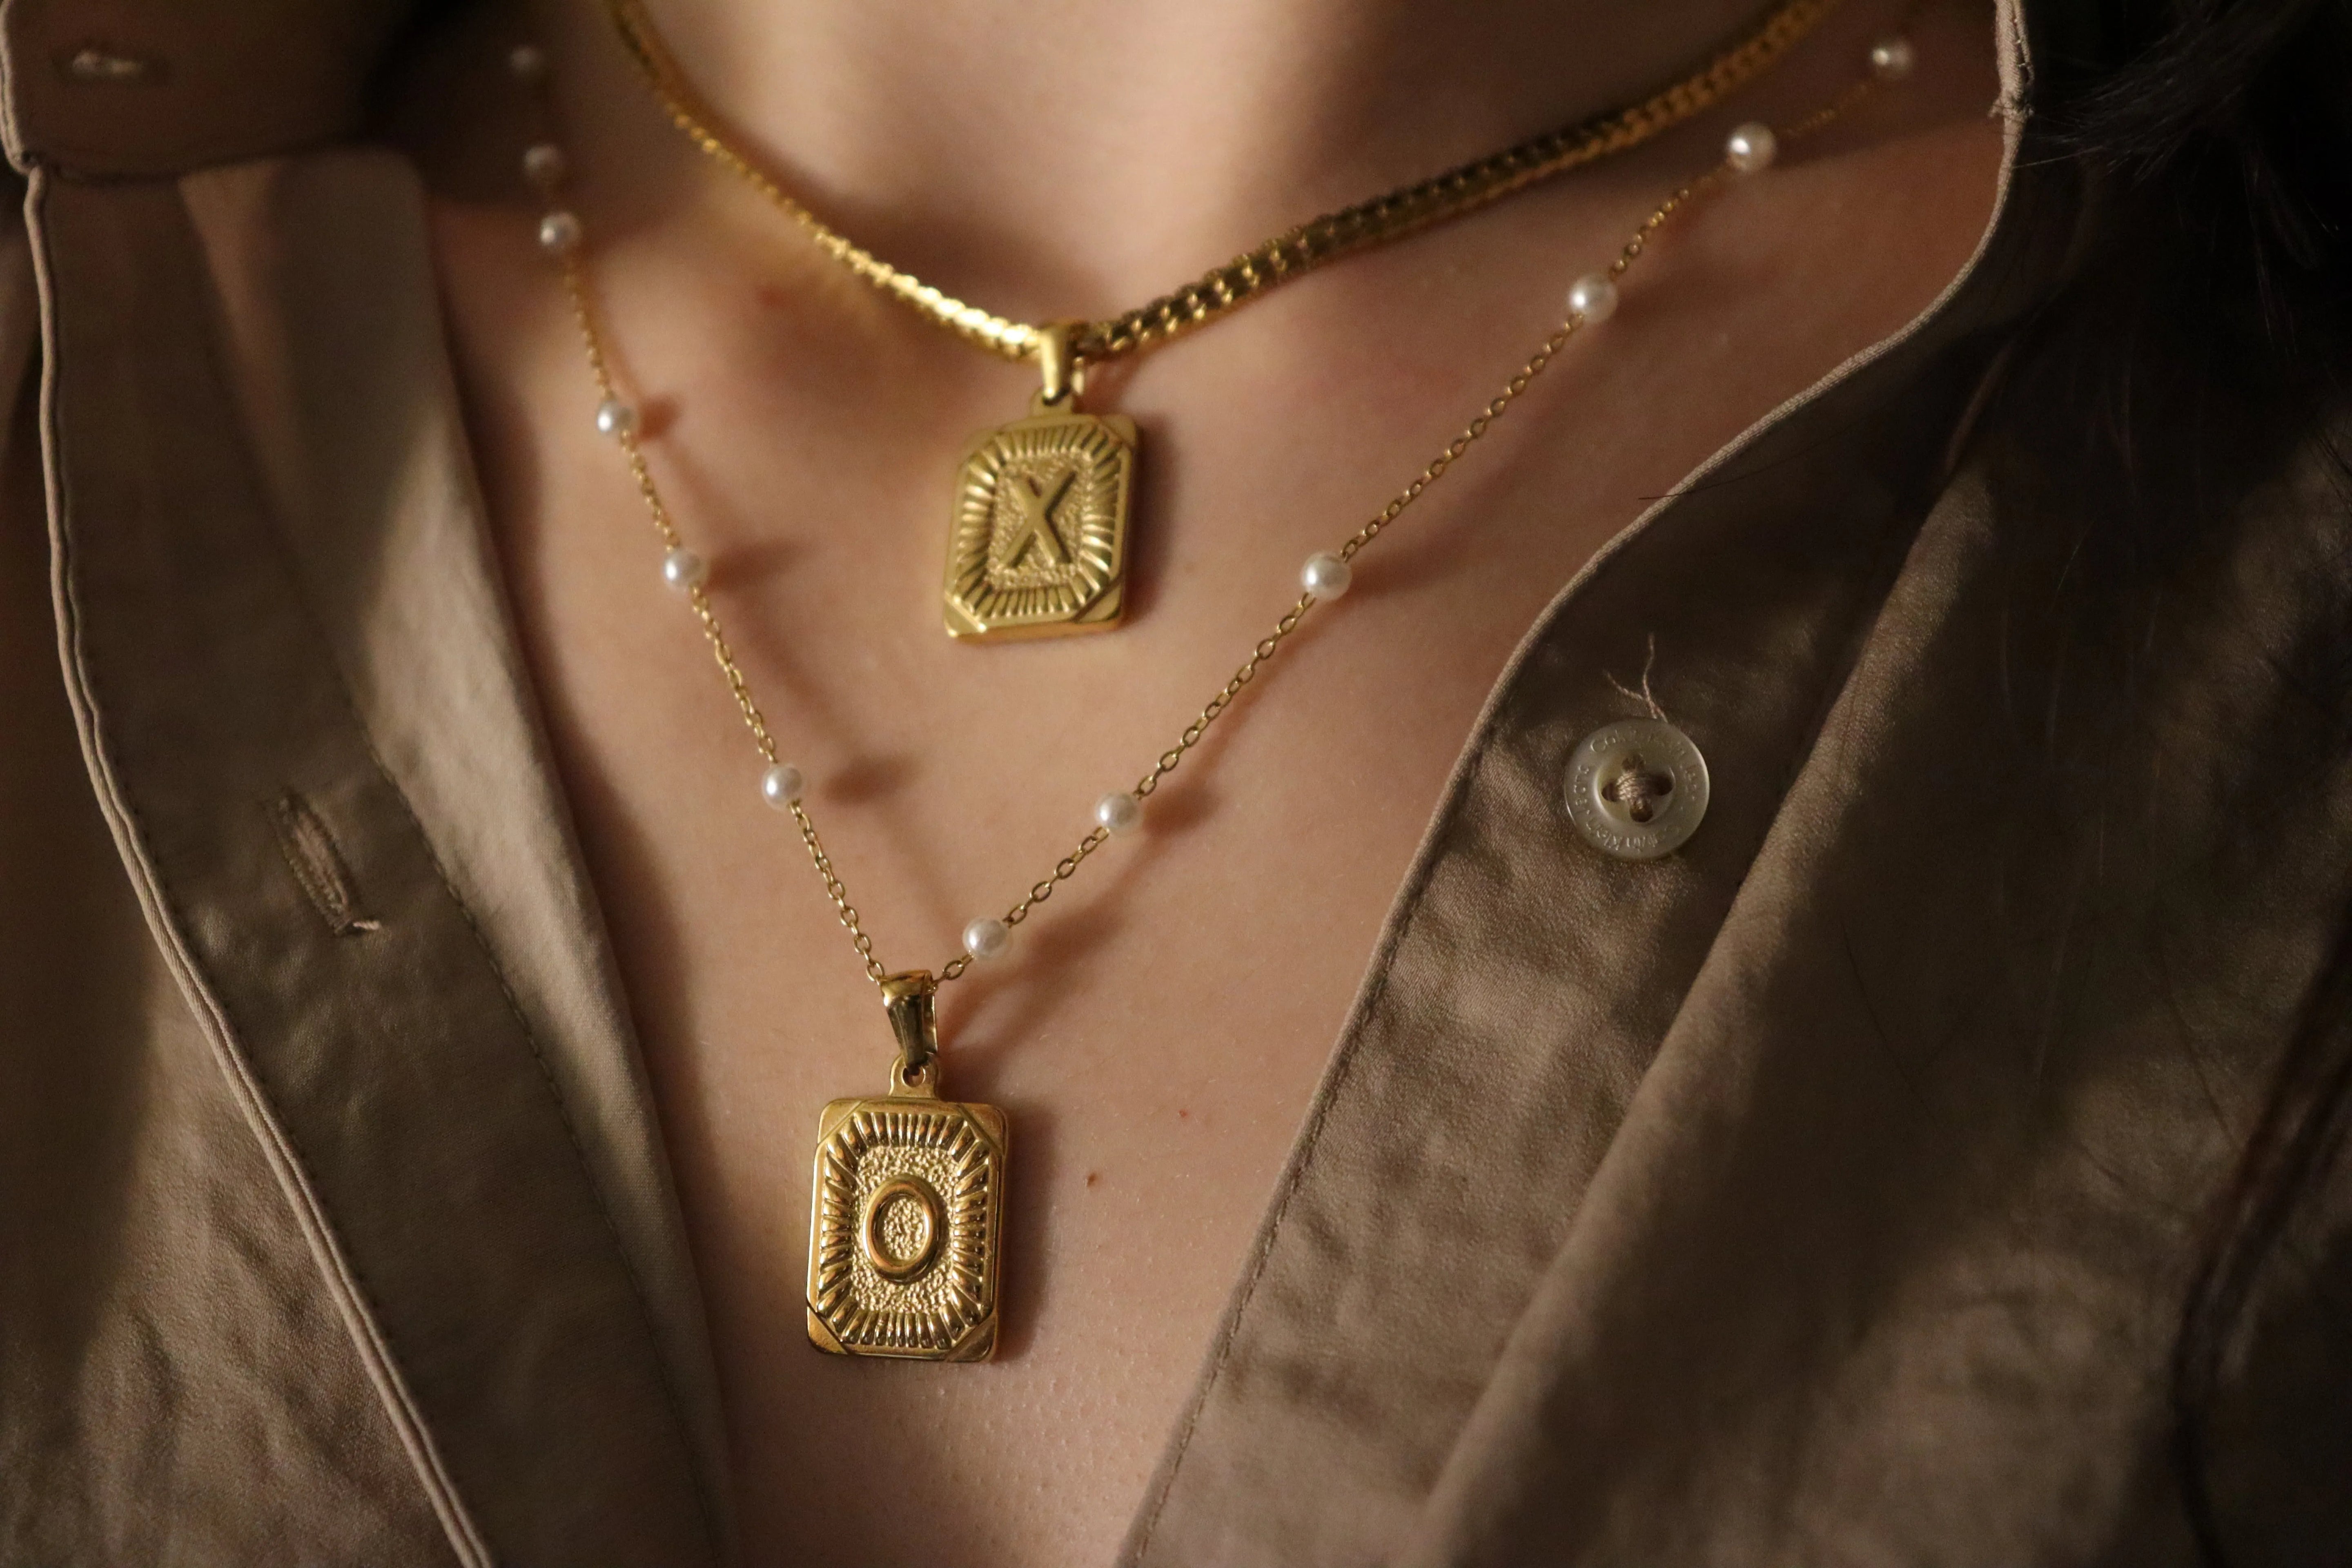 Gold Square Initial Necklace product images.